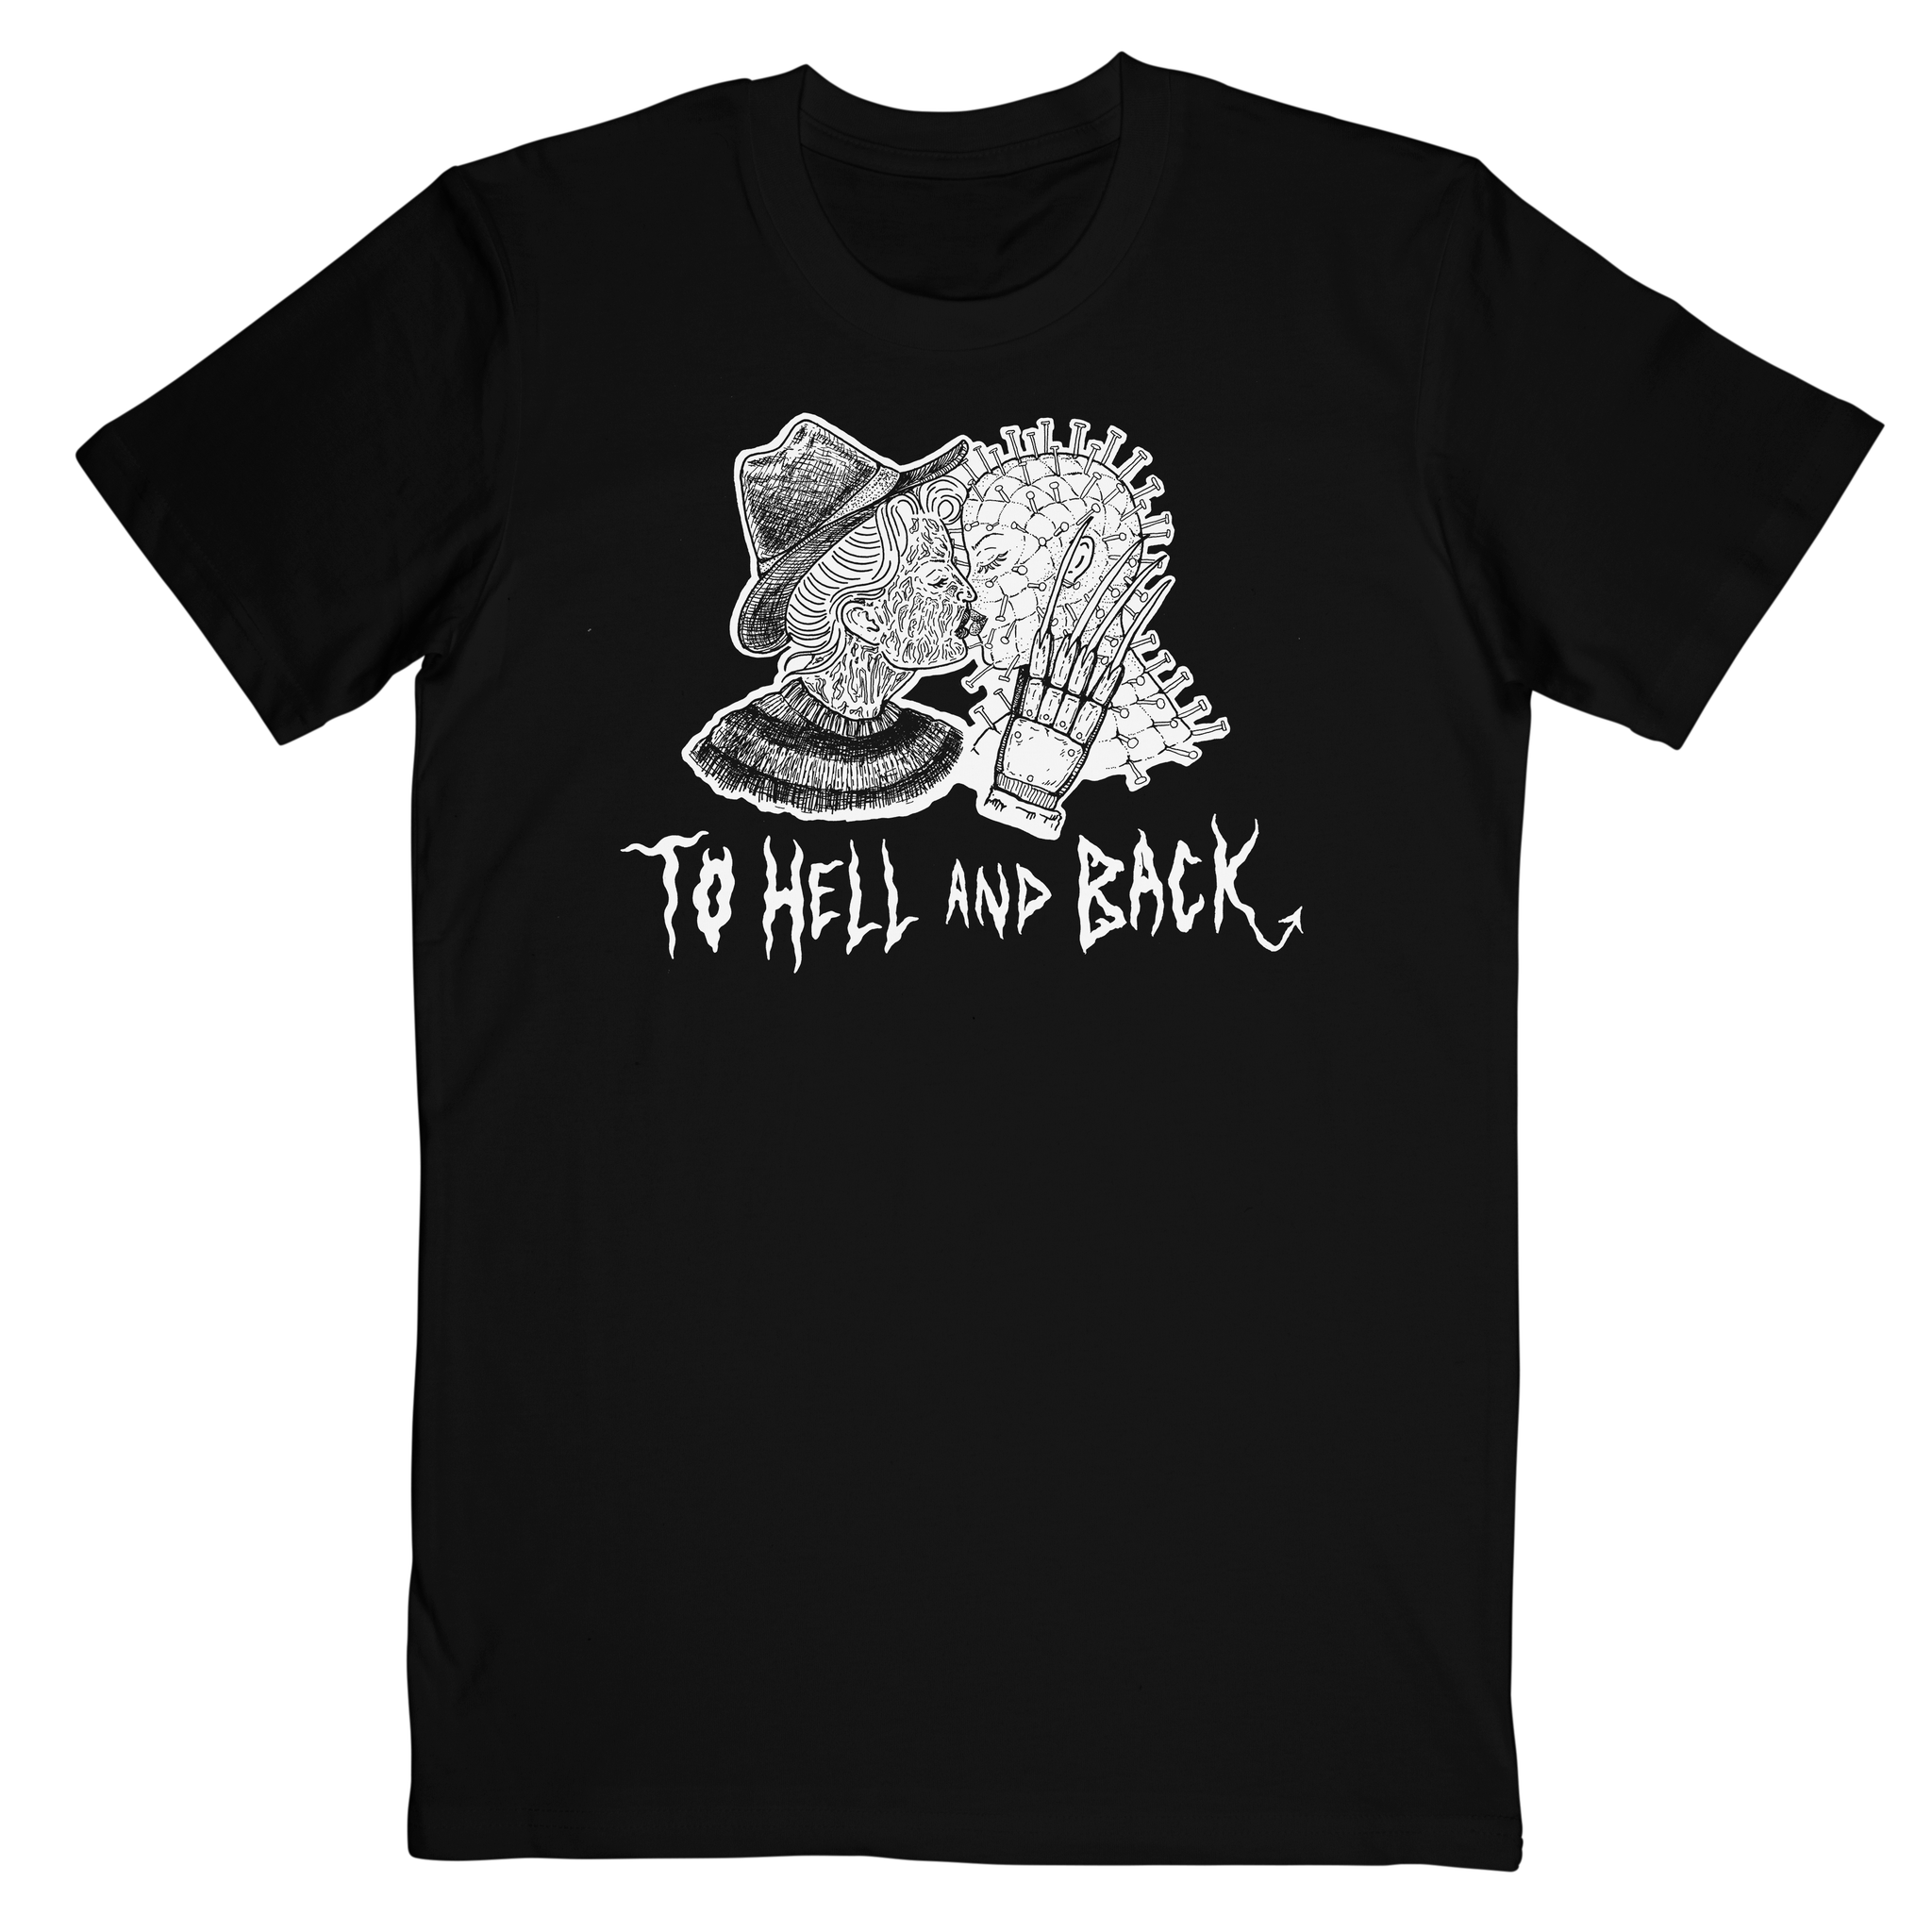 'To Hell and Back' T-shirt